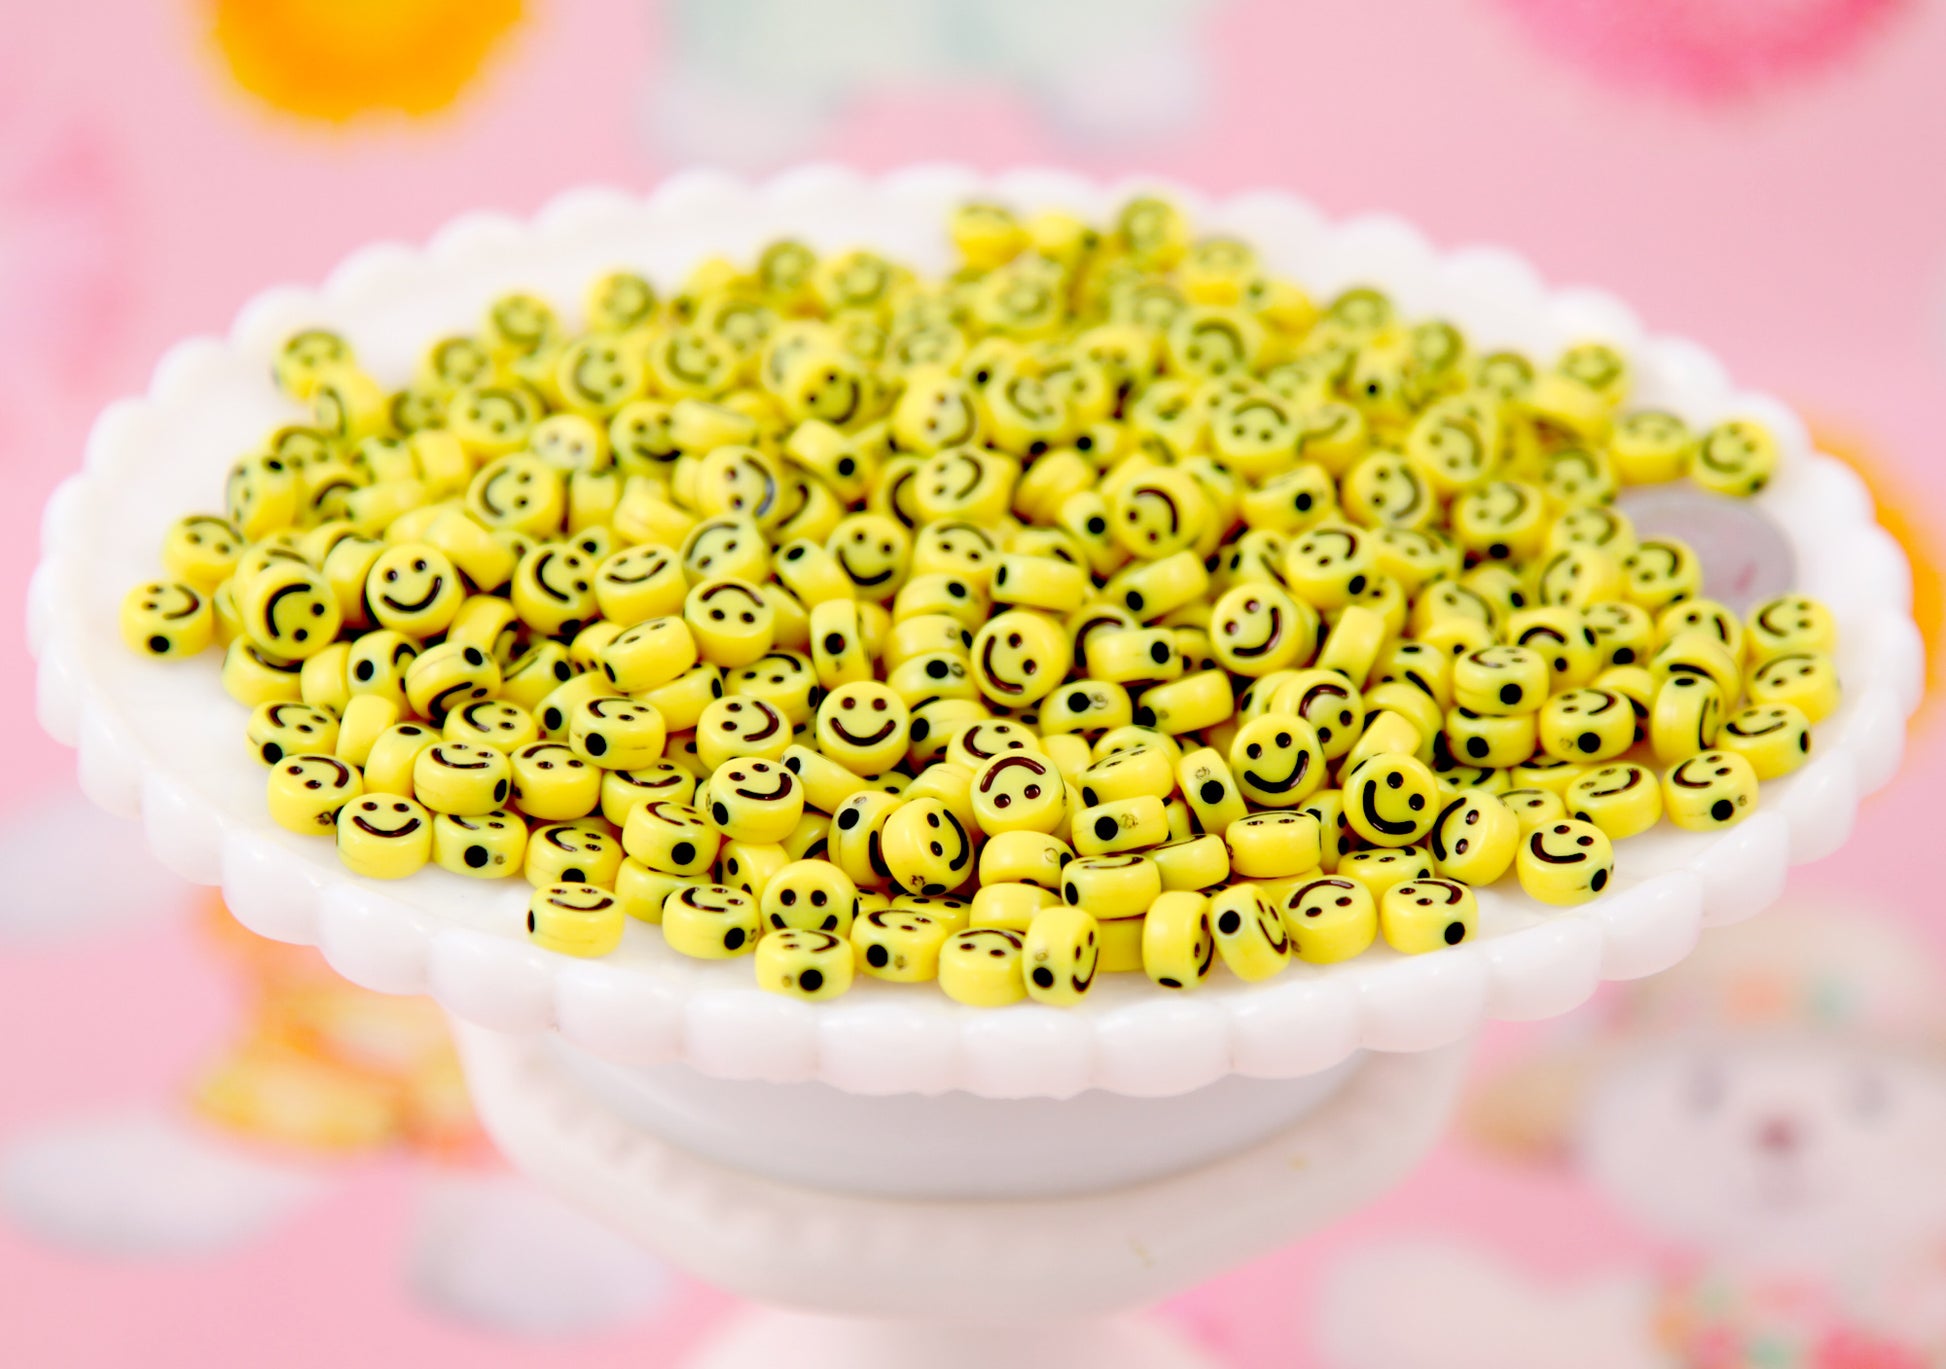 Smiley Face Beads Happy Jewelry Supplies Emoji Jewelry 7mm Mixed